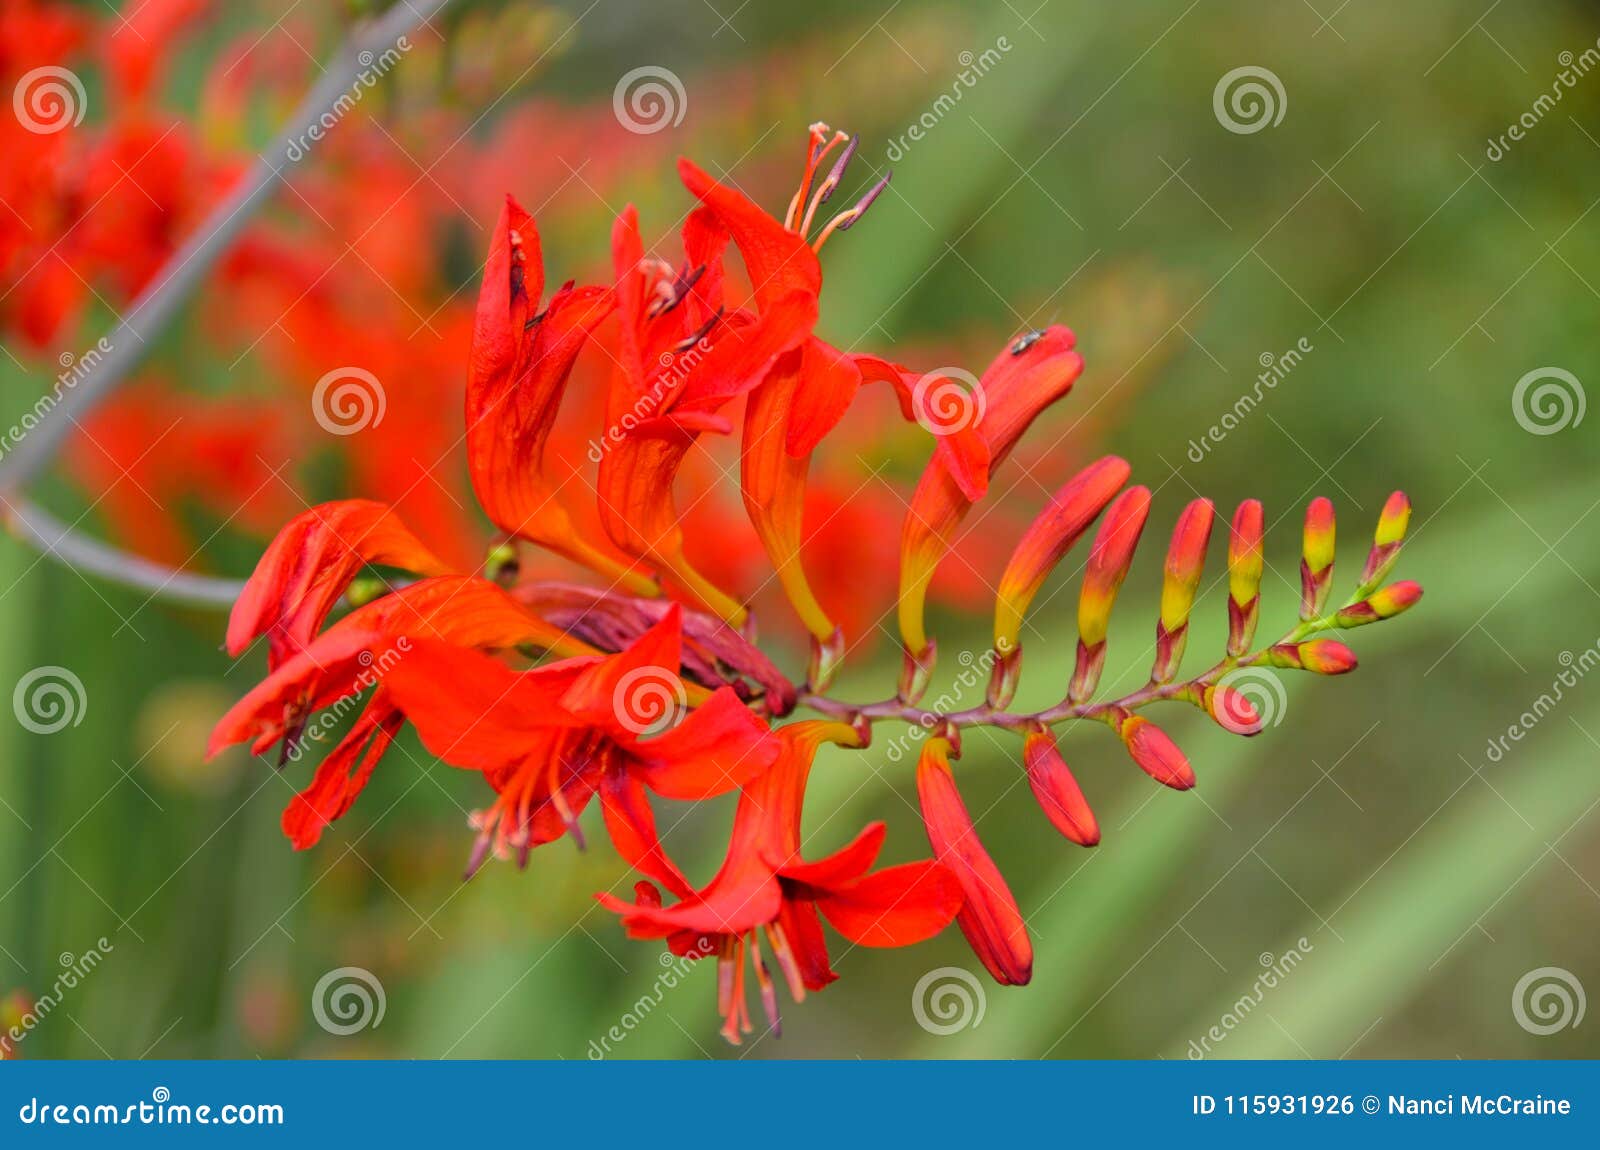 red crocosmia buds attract butterflies and hummingbirds